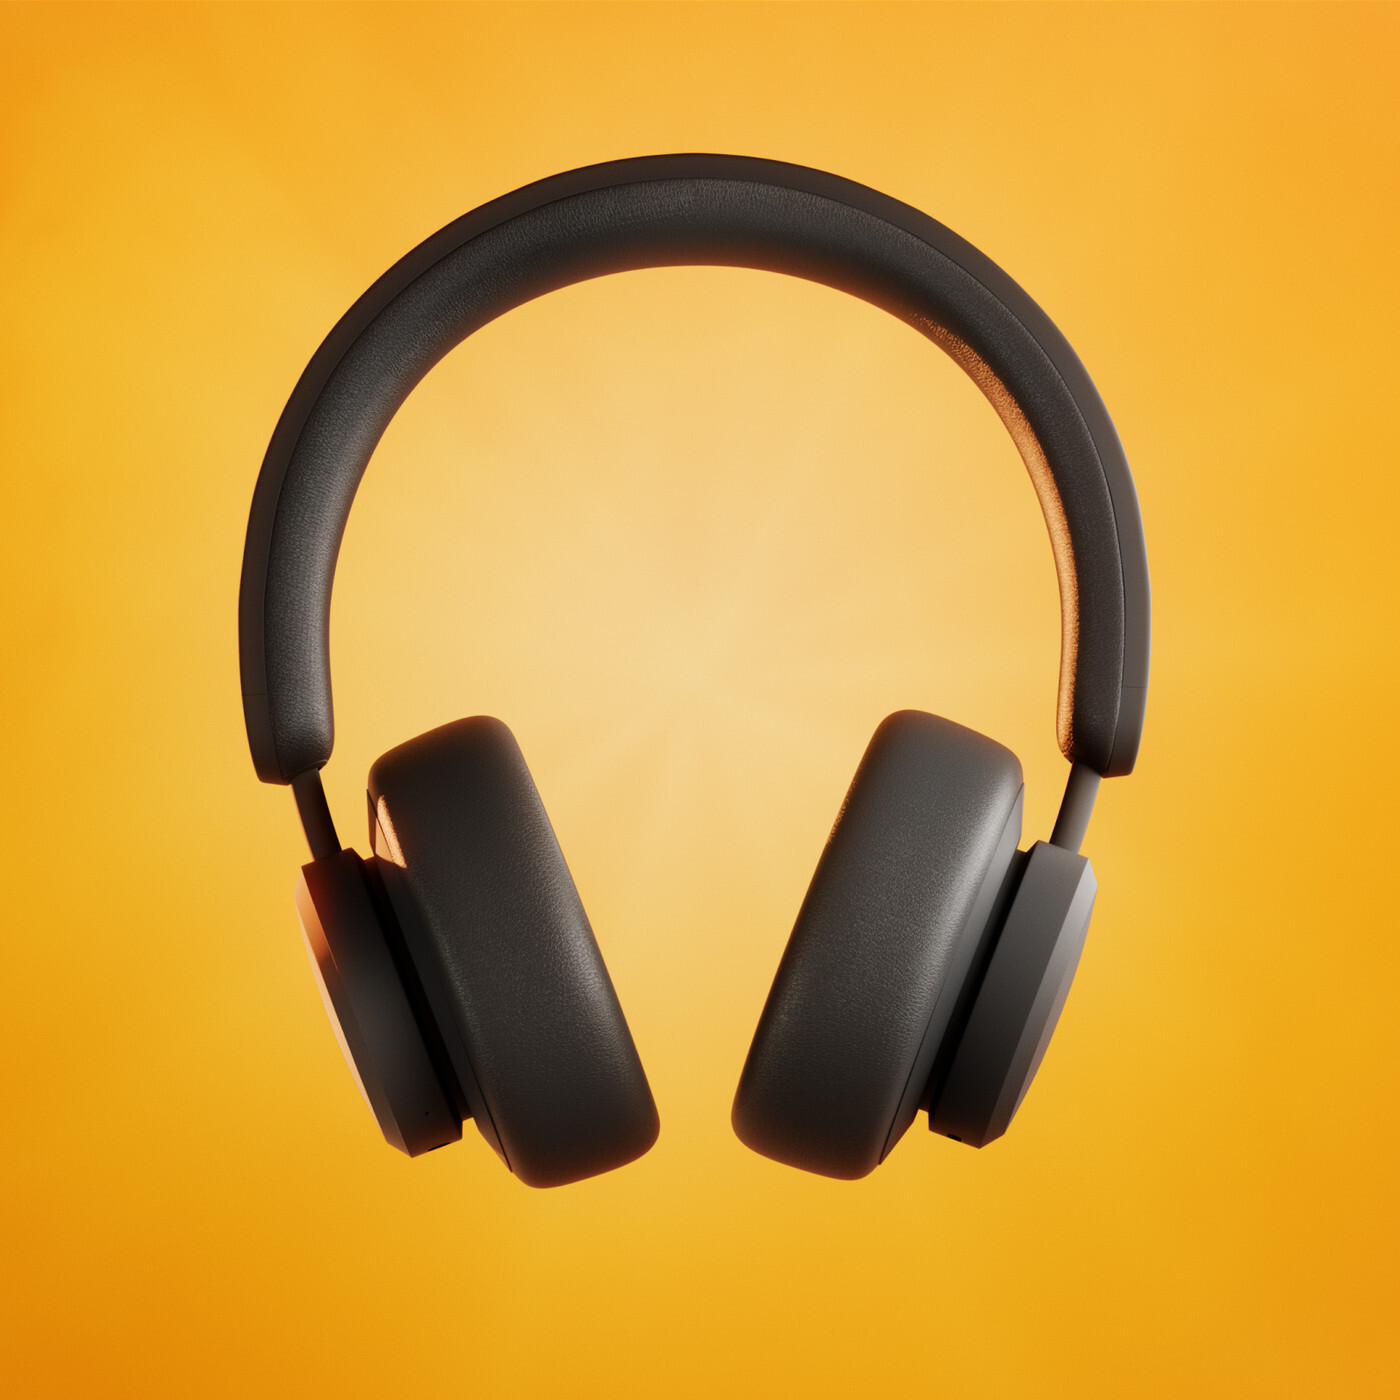 What Makes a Headphone/Headset Perfect for Workplace or Home Office for Remote Work 